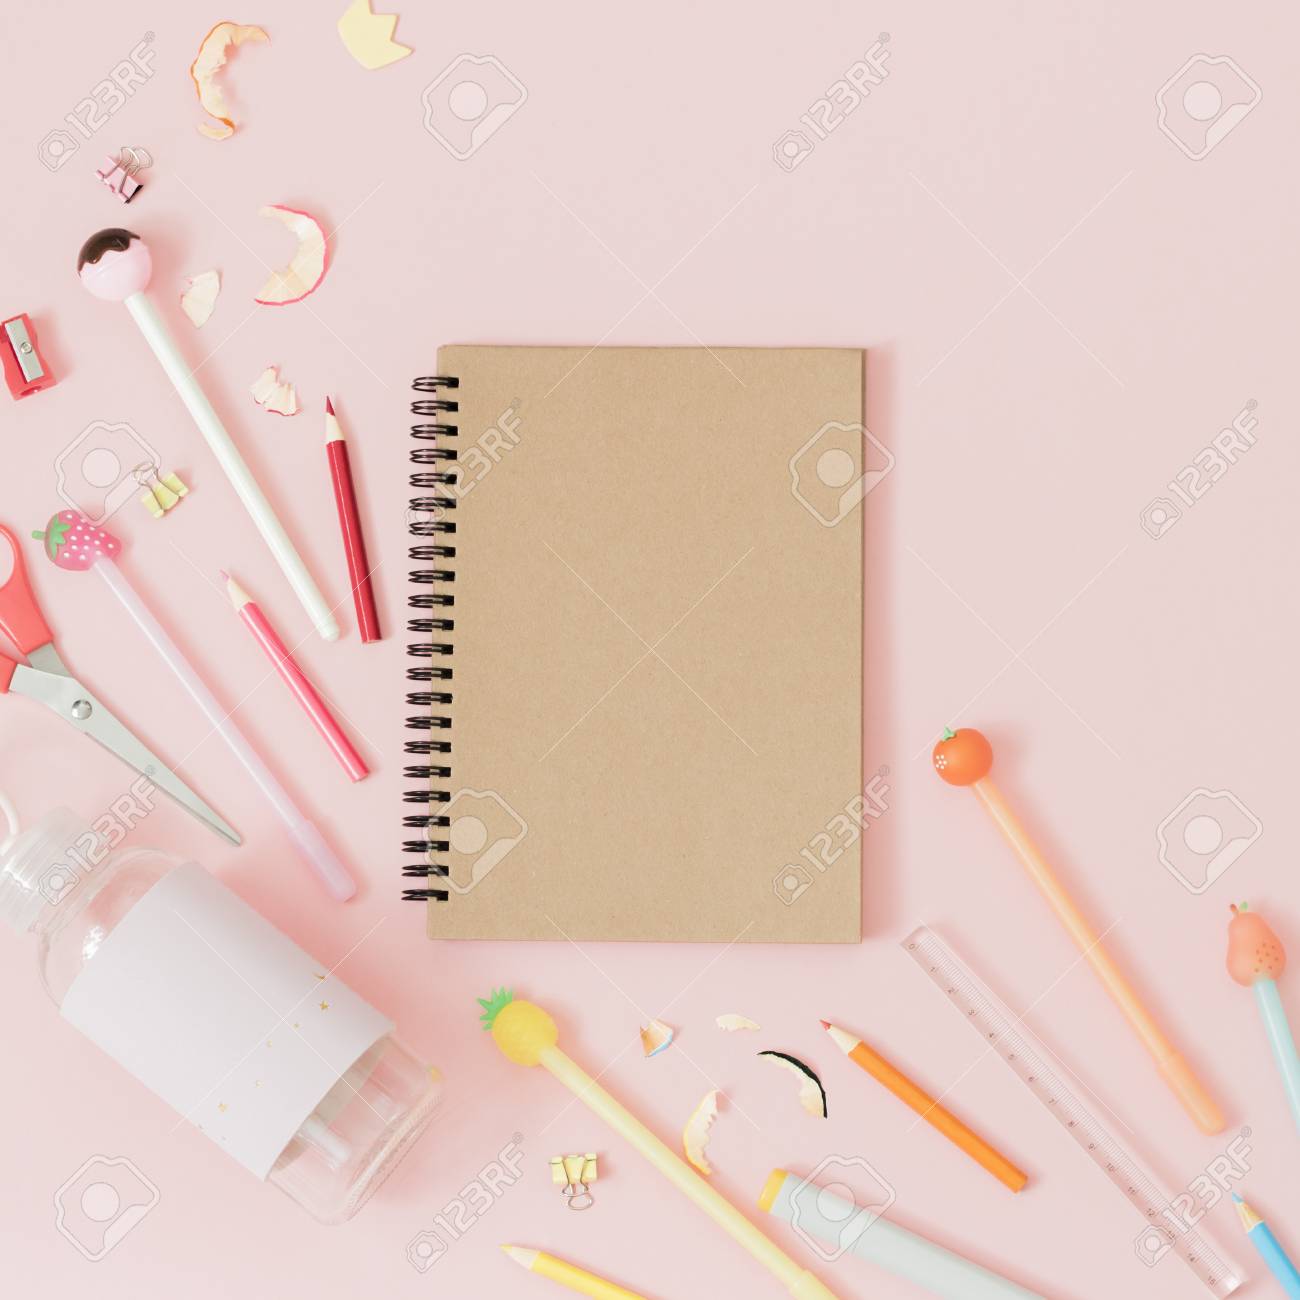 Colorful Stationery On Pastel Pink Background School Concept